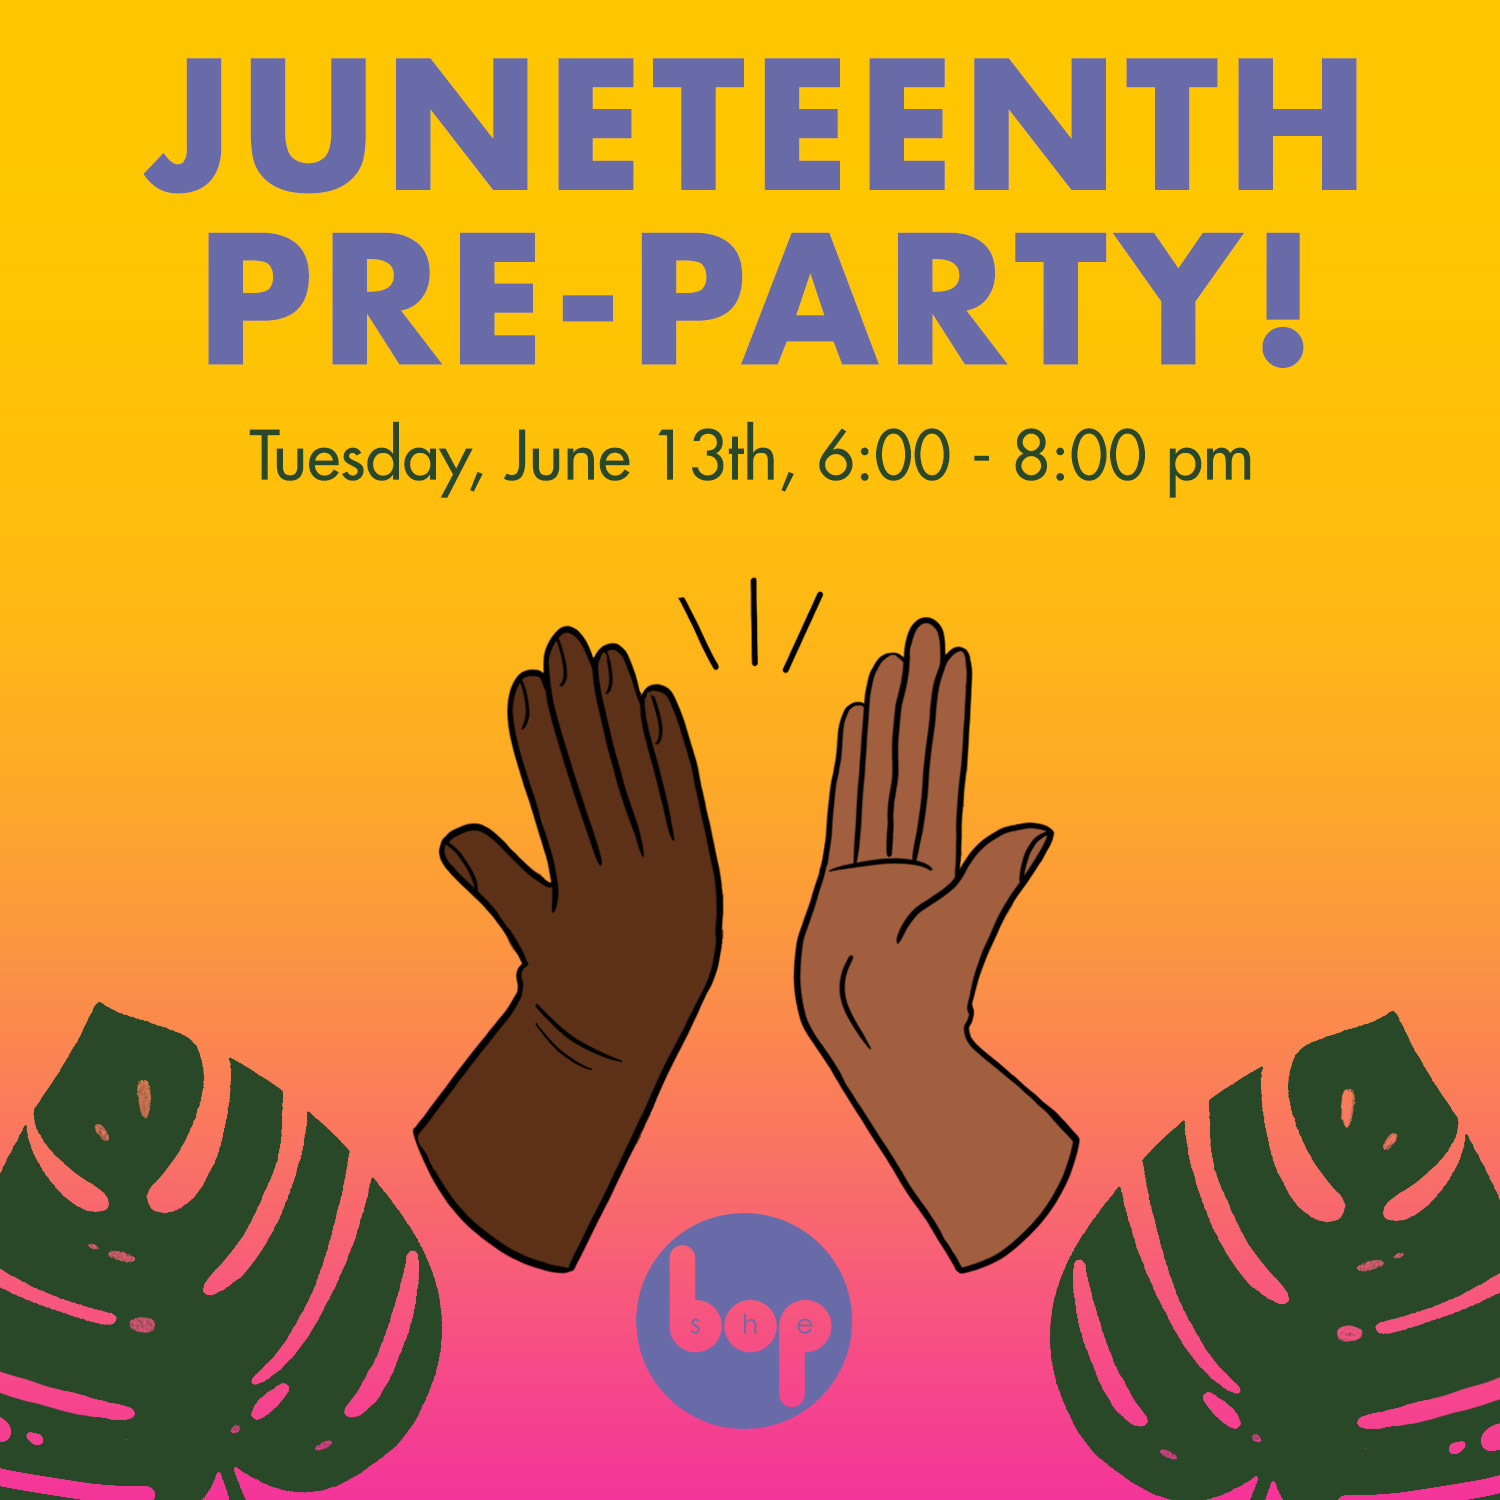 Juneteenth Pre-Party!